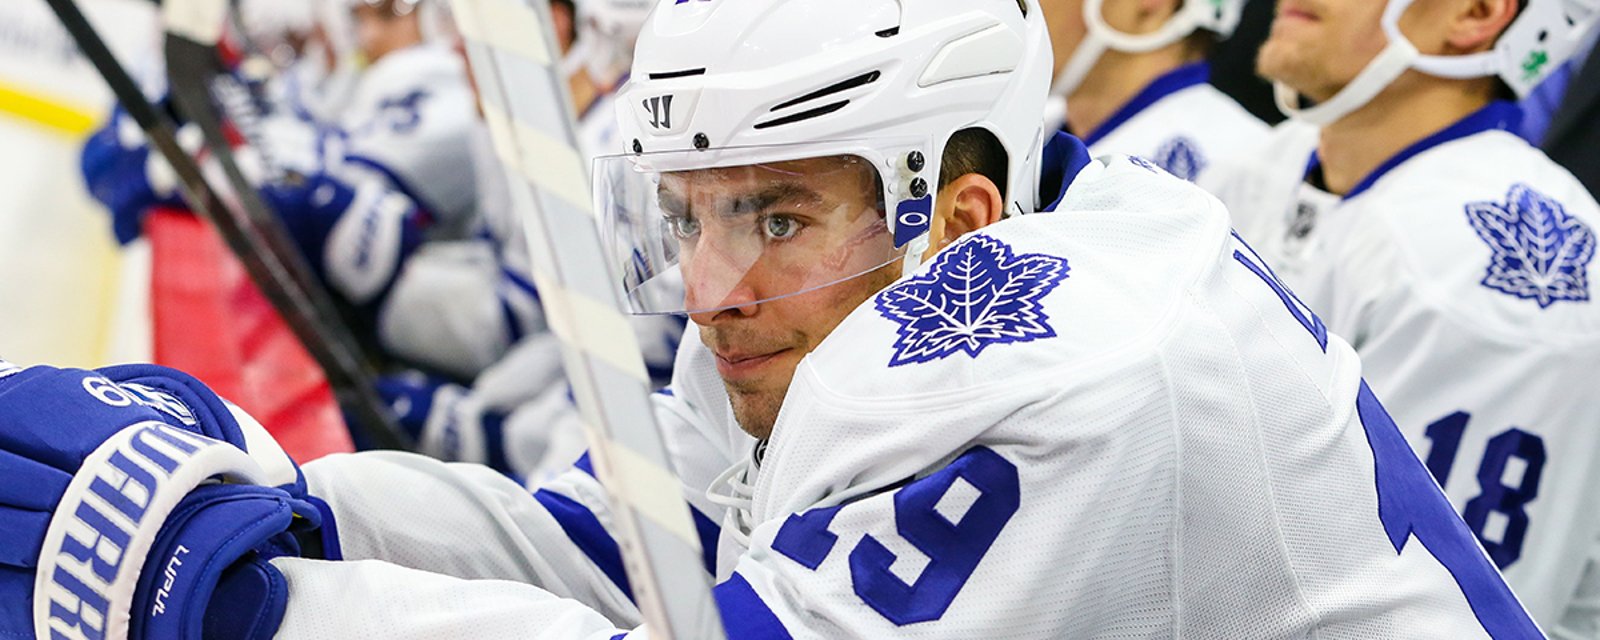 Breaking: NHL rules in the Lupul injury case